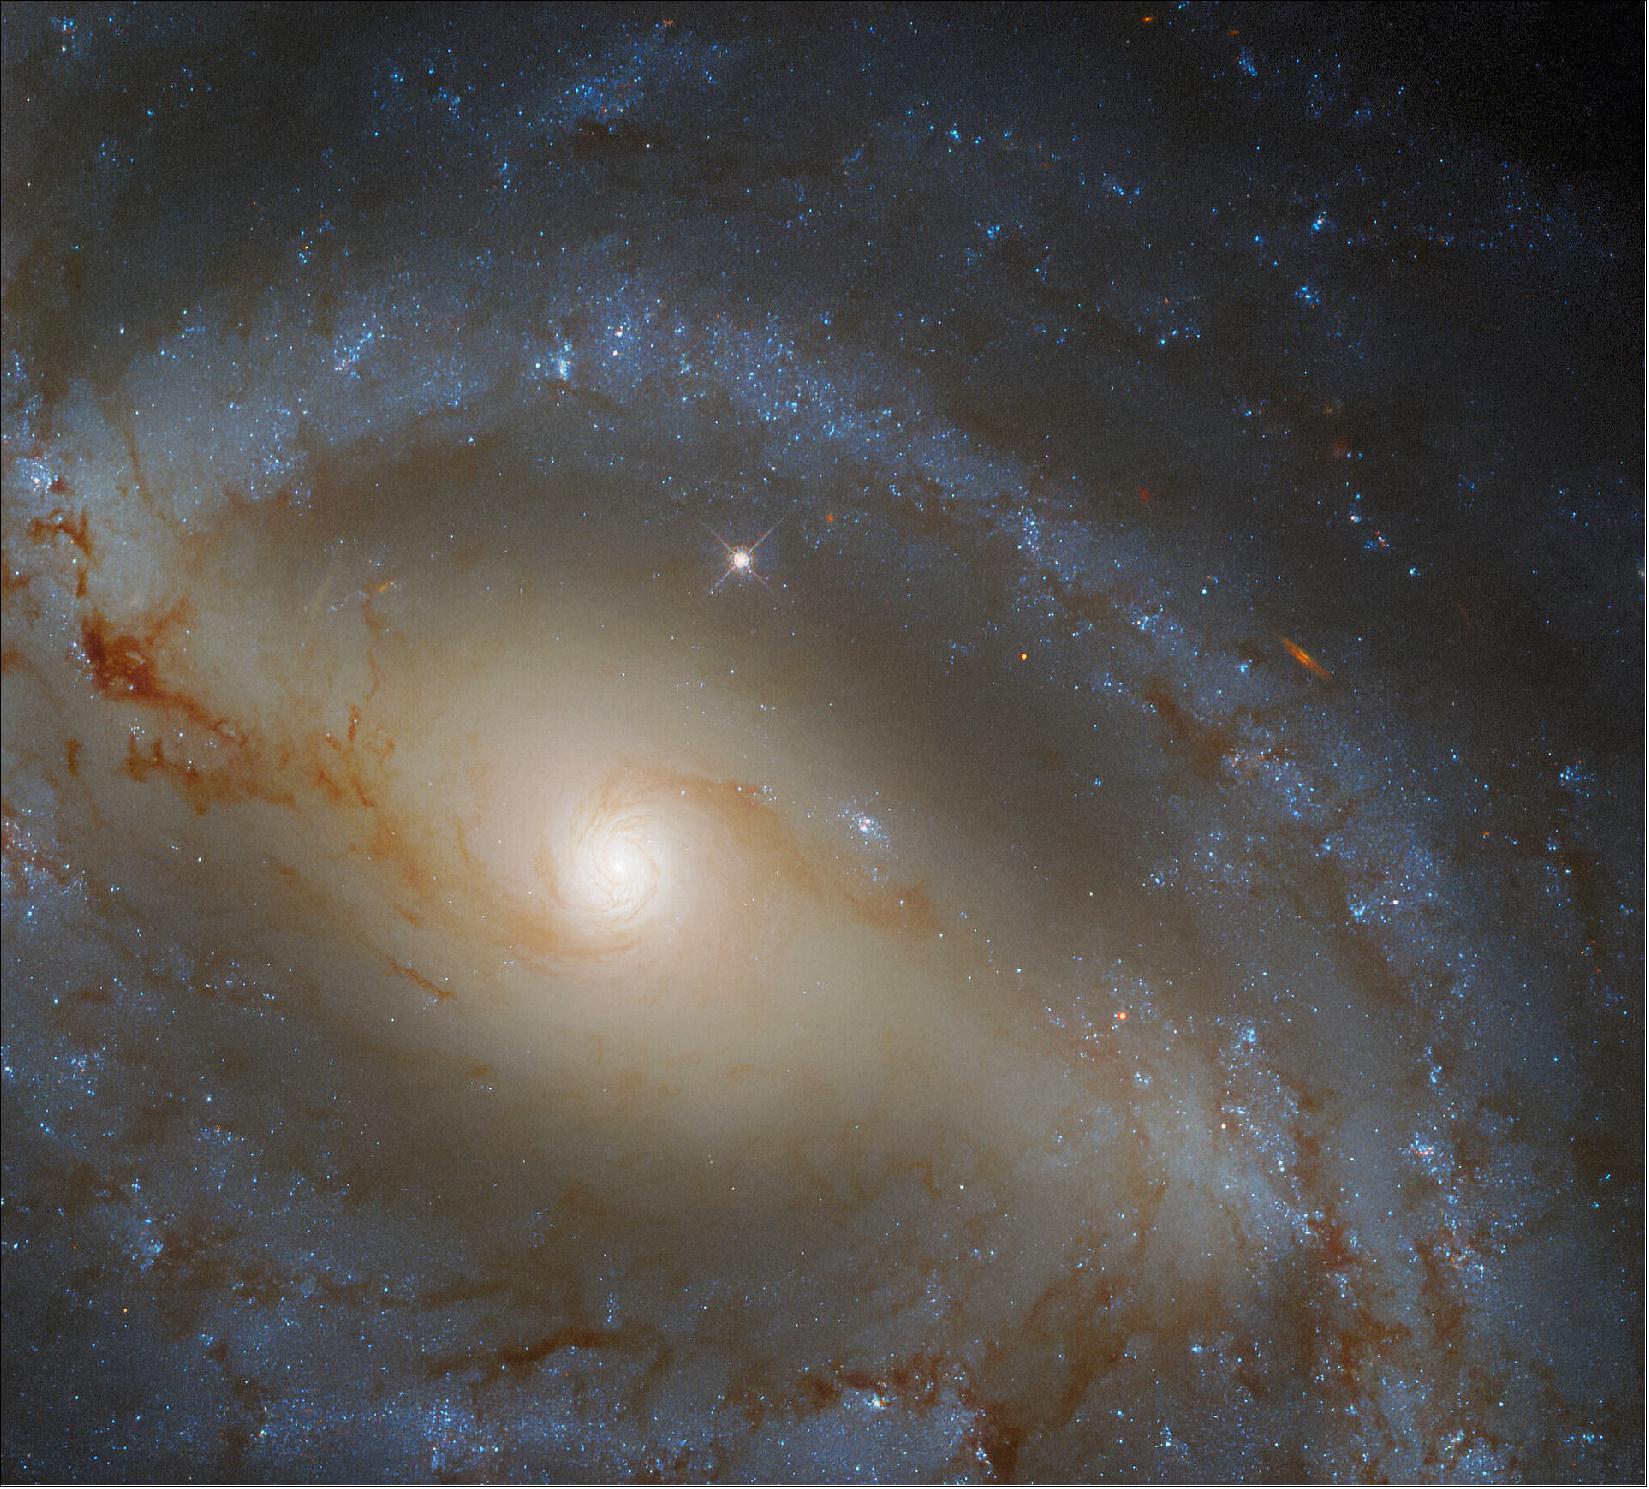 Figure 59: The scientific study behind this image was also split into two parts — observations from Hubble’s Wide Field Camera 3 and observations from the ground-based Gemini Observatory. These two observatories joined forces to better understand the relationship between galaxies like NGC 5921 and the supermassive black holes they contain. Hubble’s contribution to the study was to determine the masses of stars in the galaxies and also to take measurements that help calibrate the observations from Gemini. Together, the Hubble and Gemini observations provided astronomers with a census of nearby supermassive black holes in a diverse variety of galaxies (ESA/Hubble & NASA, J. Walsh; CC BY 4.0, Acknowledgement: R. Colombari)